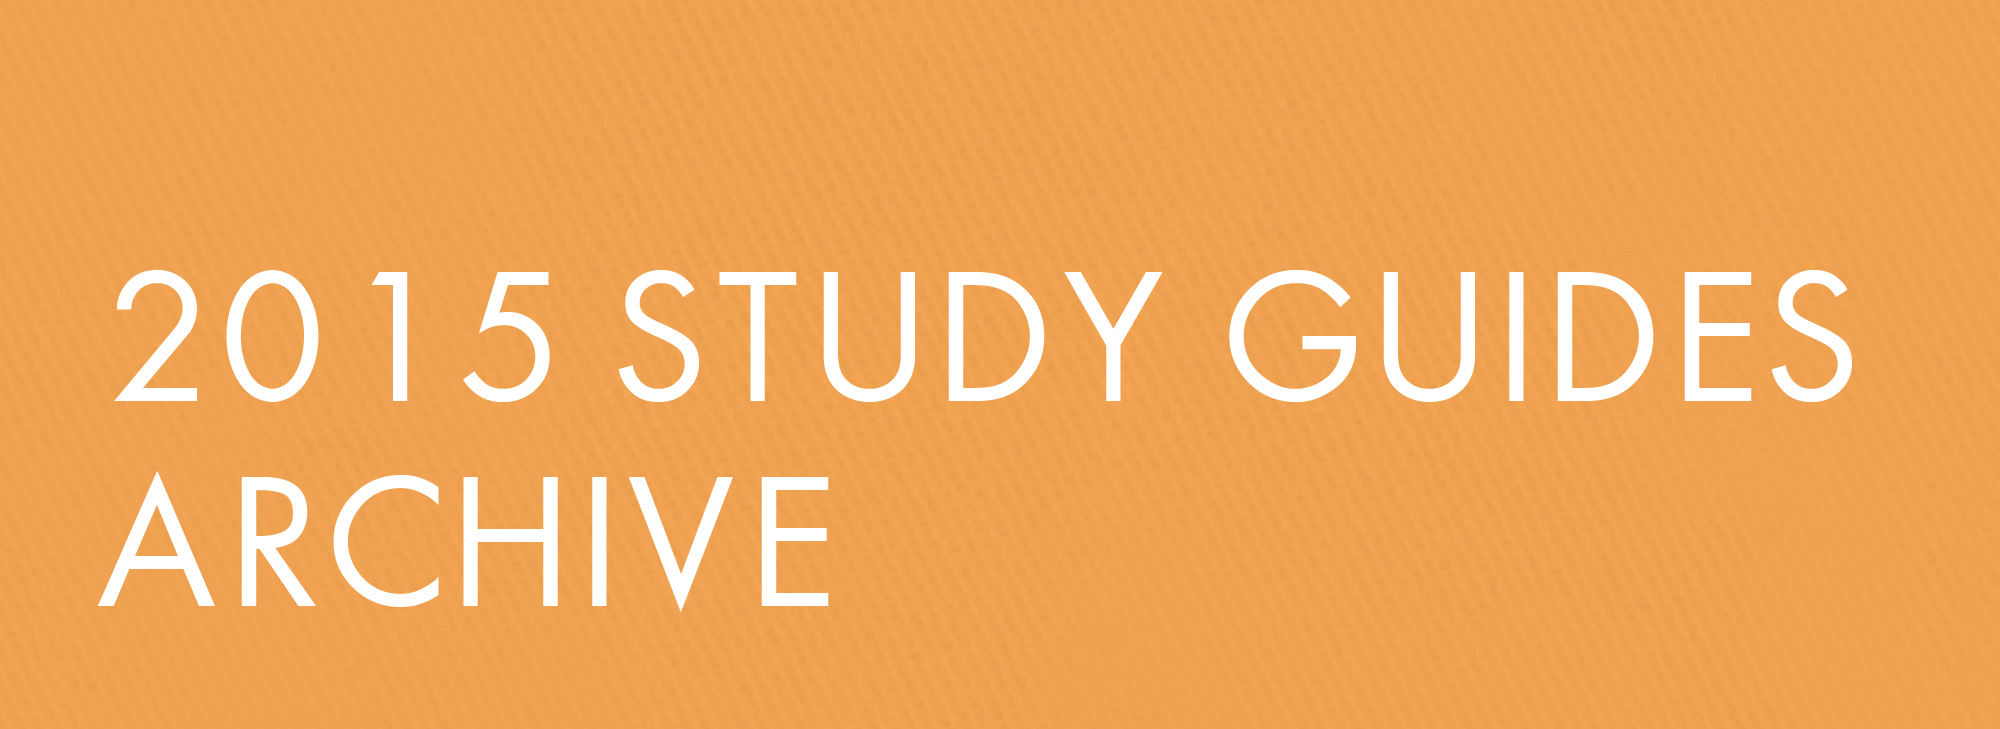 2015 Study Guides Archive